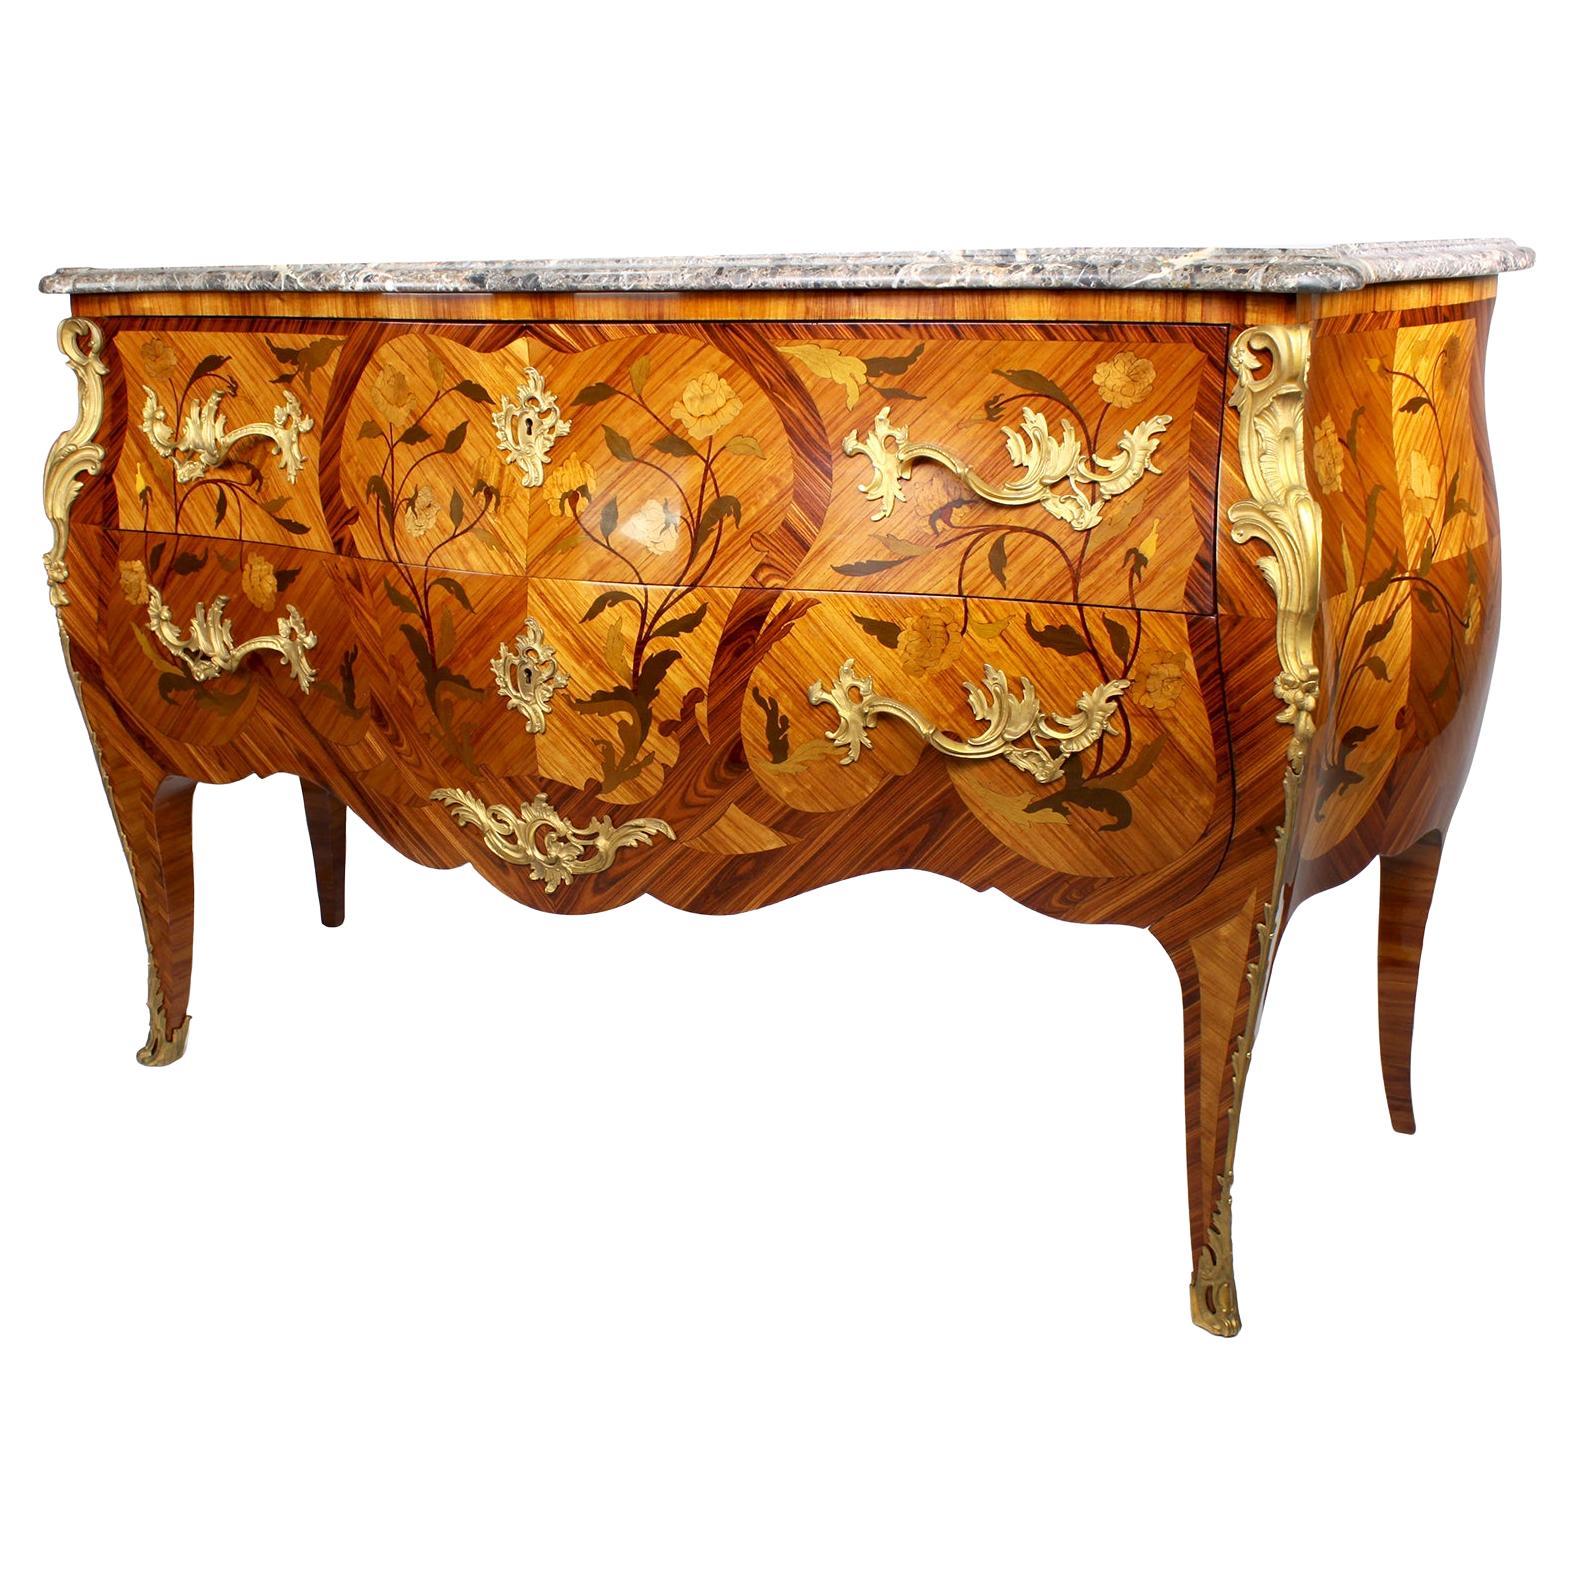 French Louis XV Style Bombé Satinwood Marquetry & Ormolu Mounted Commode